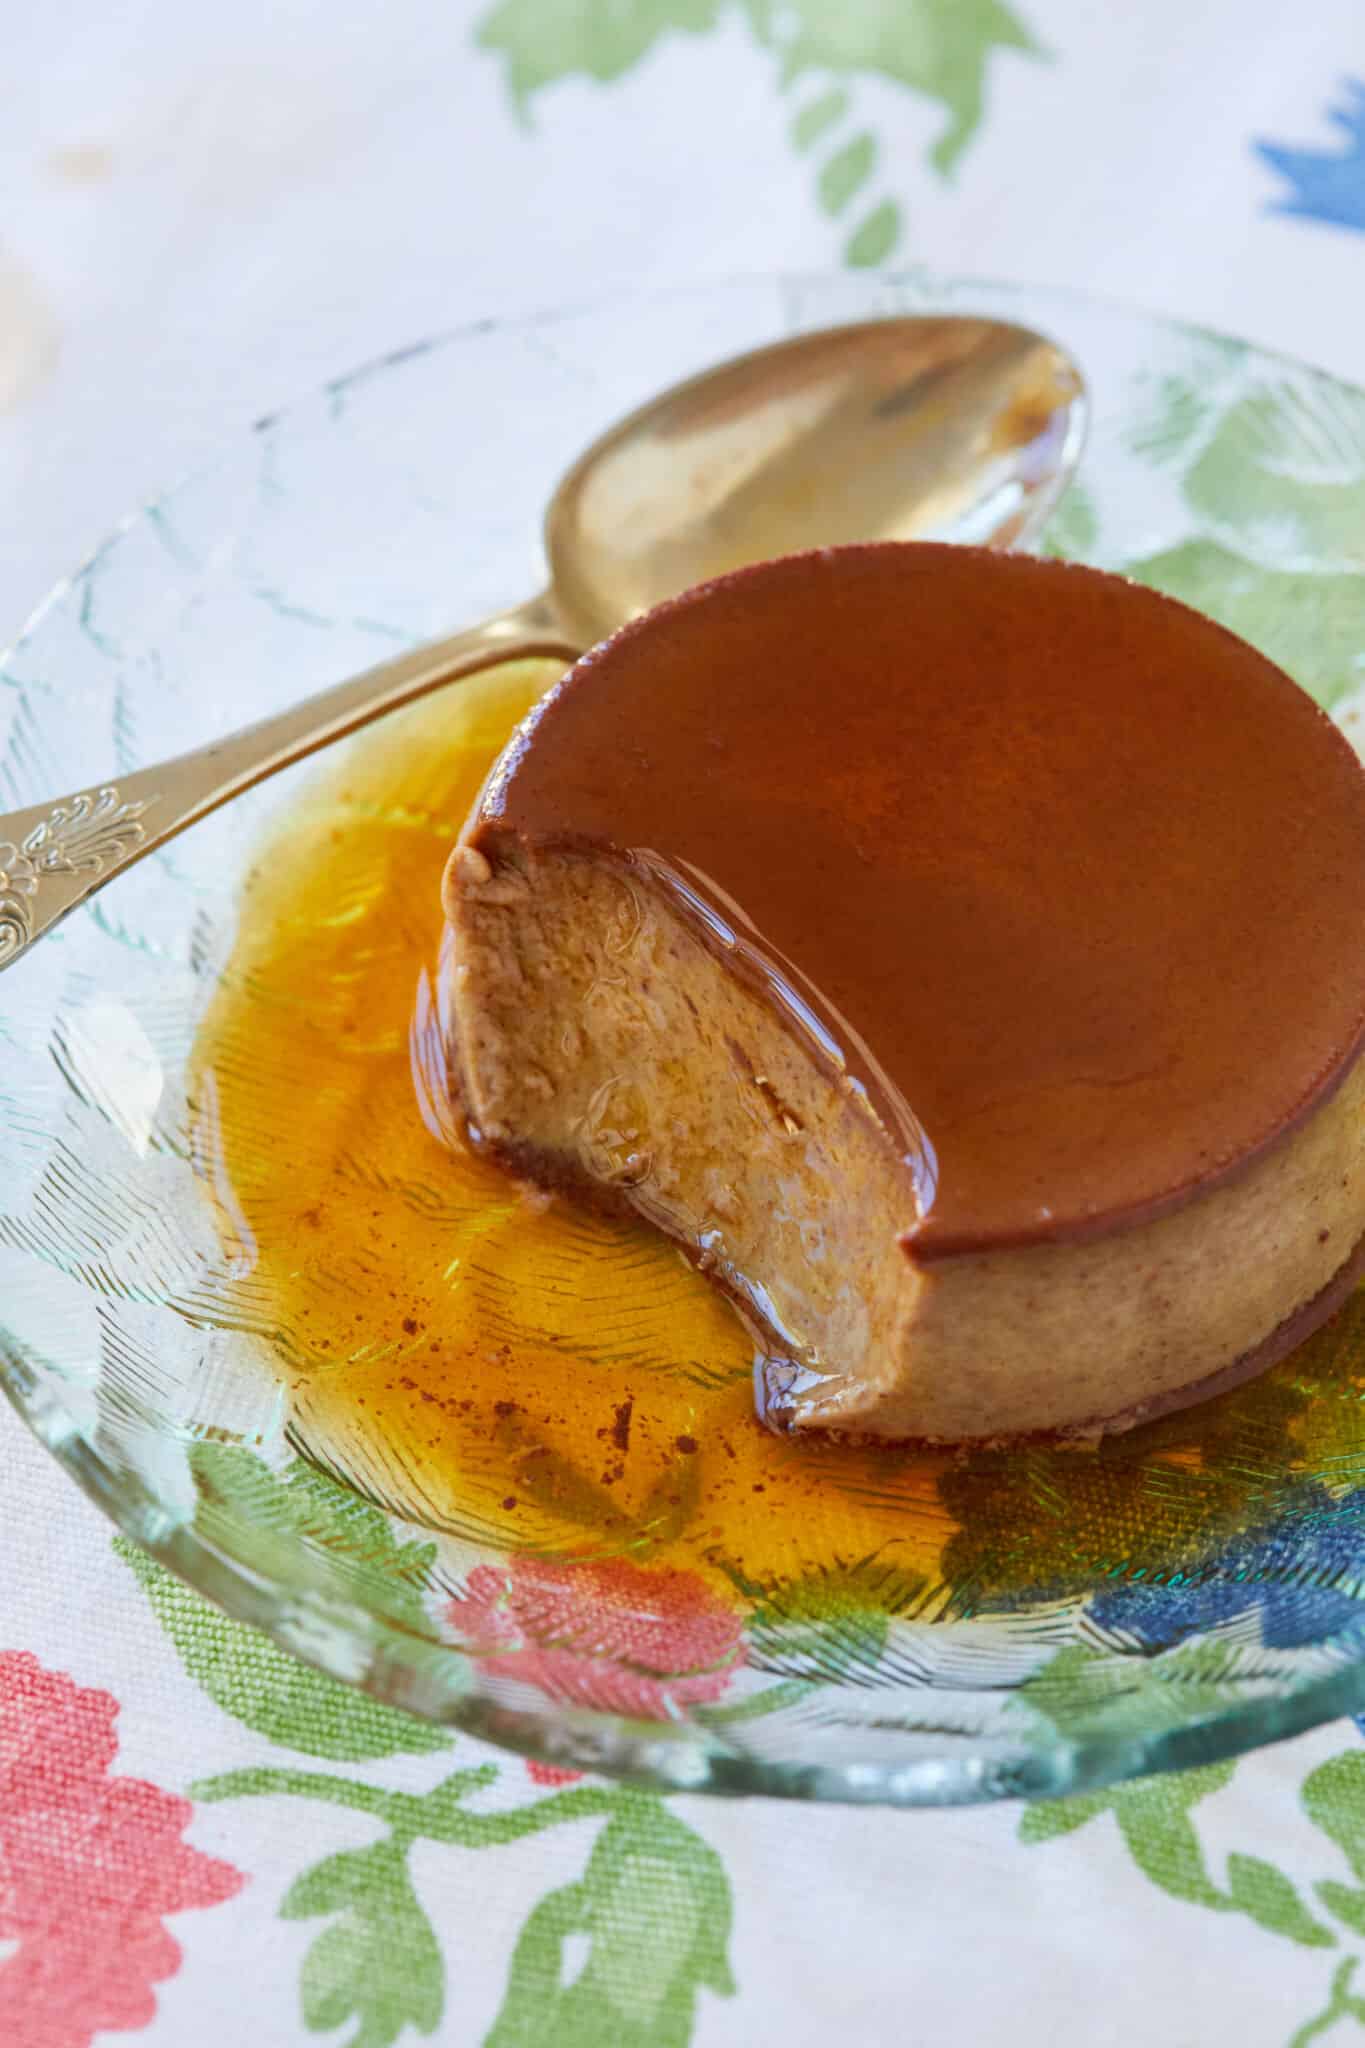 Chocolate Crème Caramel is served on a glass dessert plate, with silky and tender custard topped with decadent sweet caramel. 